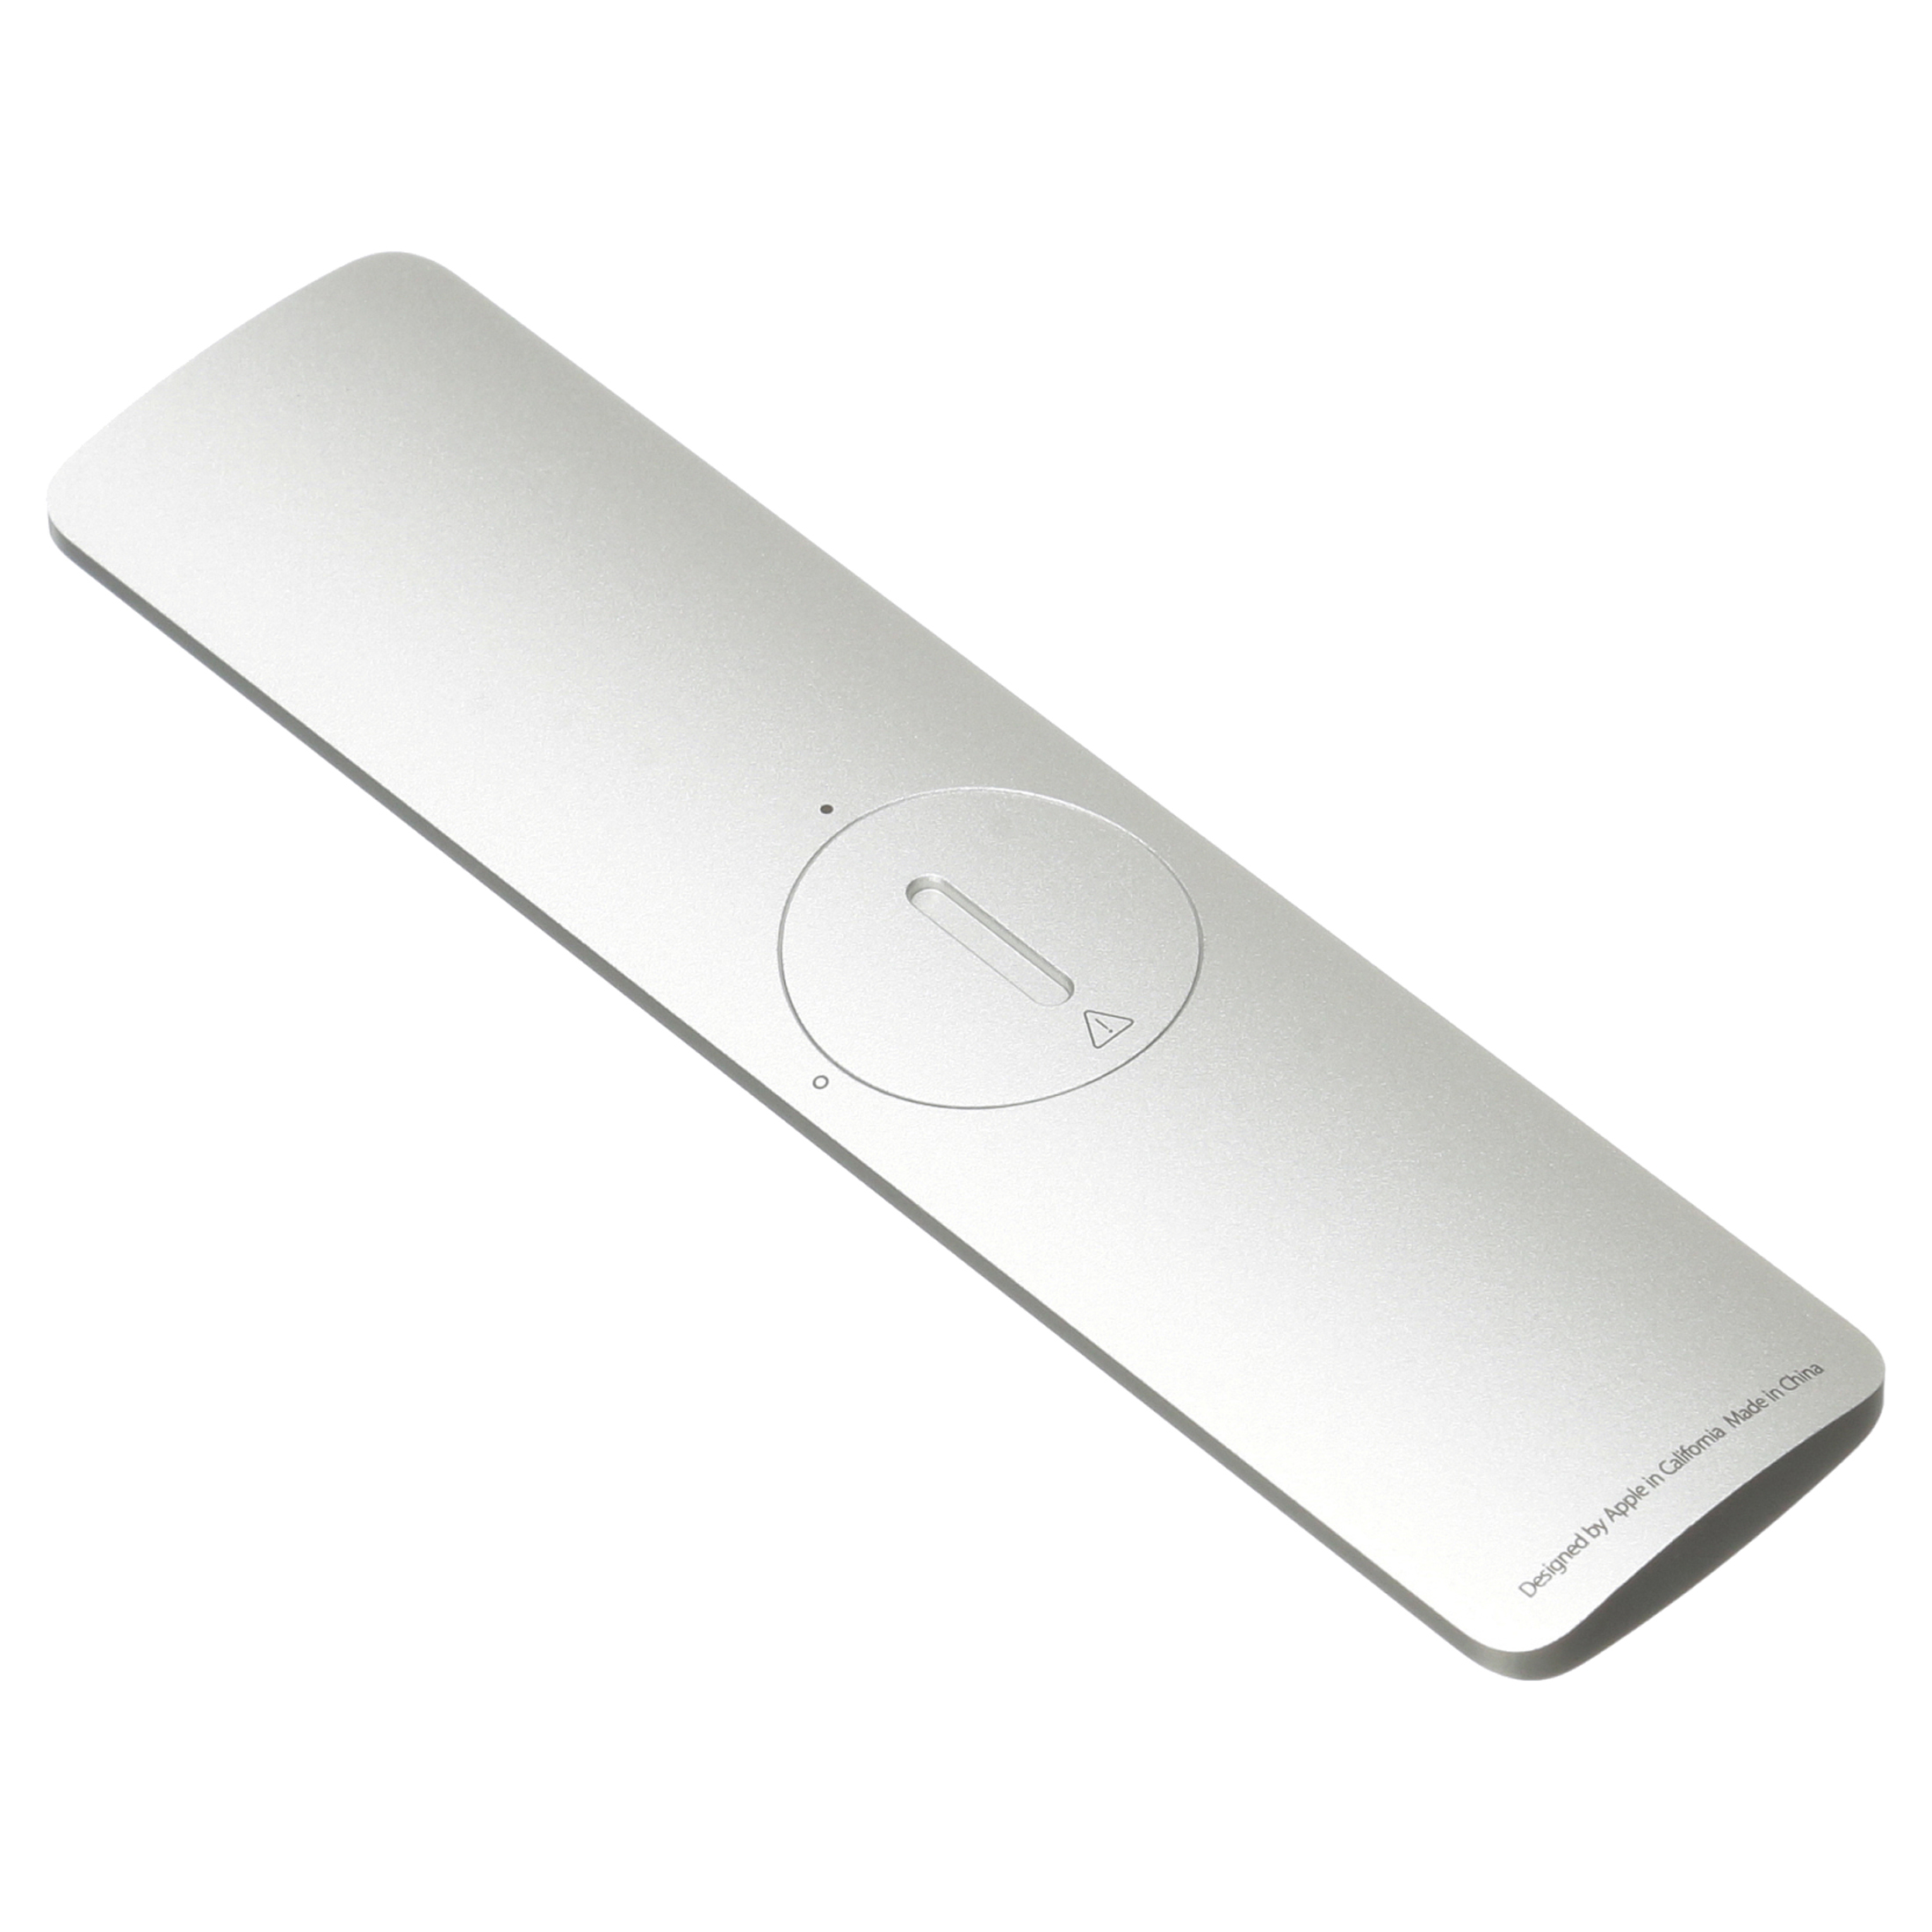 Apple Remote - image 4 of 7